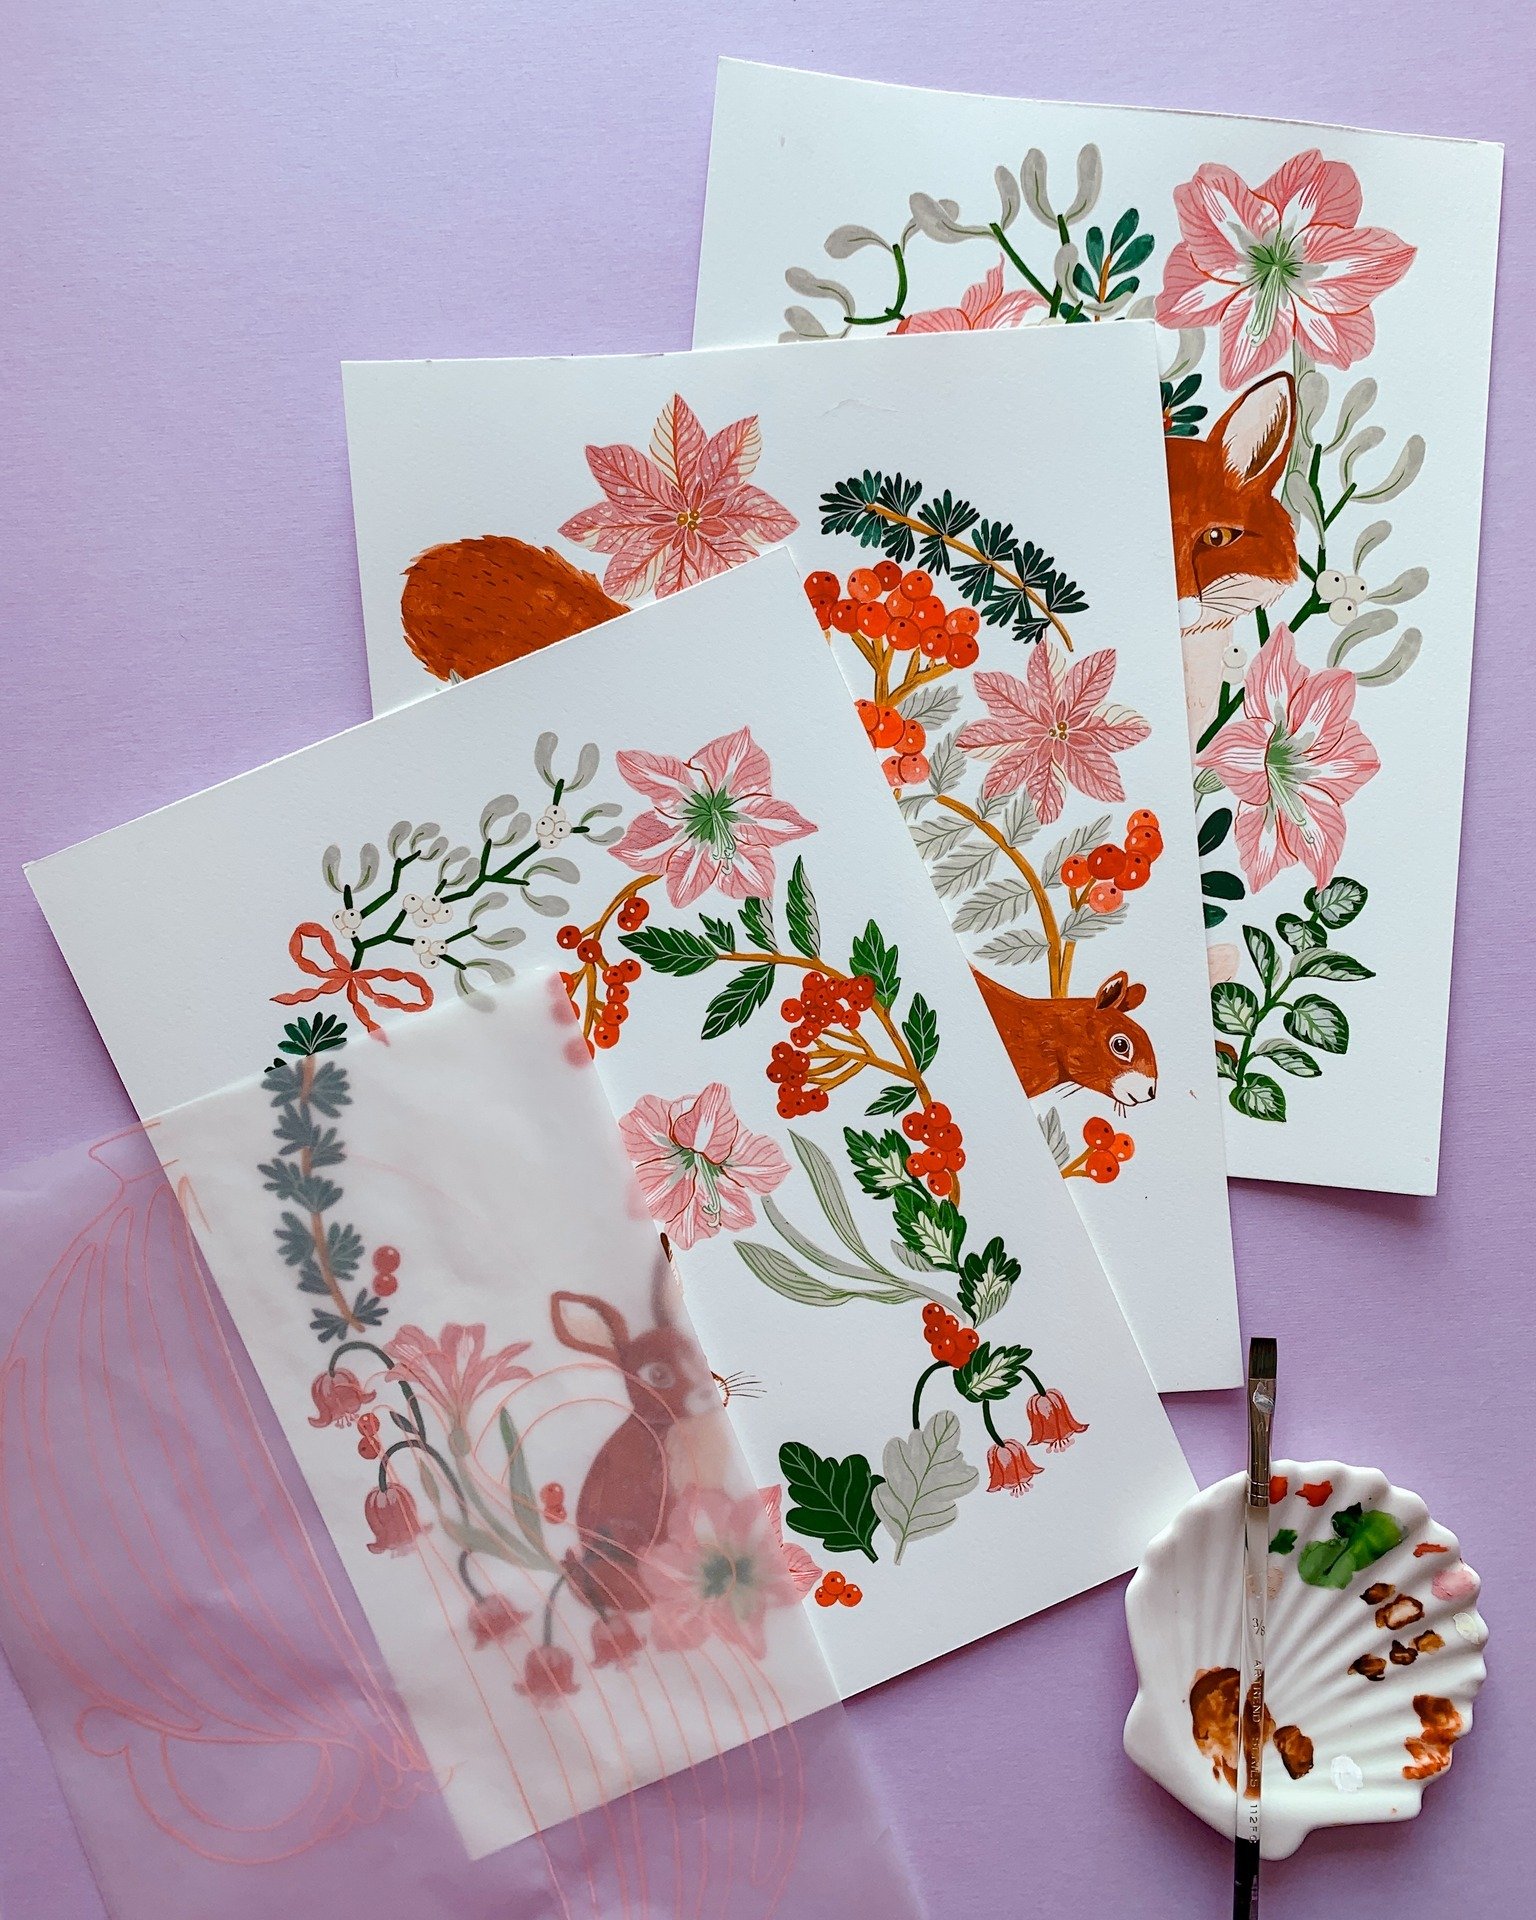 These past weeks, I've been painting these flower-filled, animal designs for my licensing portfolio. Painting traditional holiday designs doesn&rsquo;t come naturally to me, so I wanted to create something fun and OTT for the festive season! (I know 